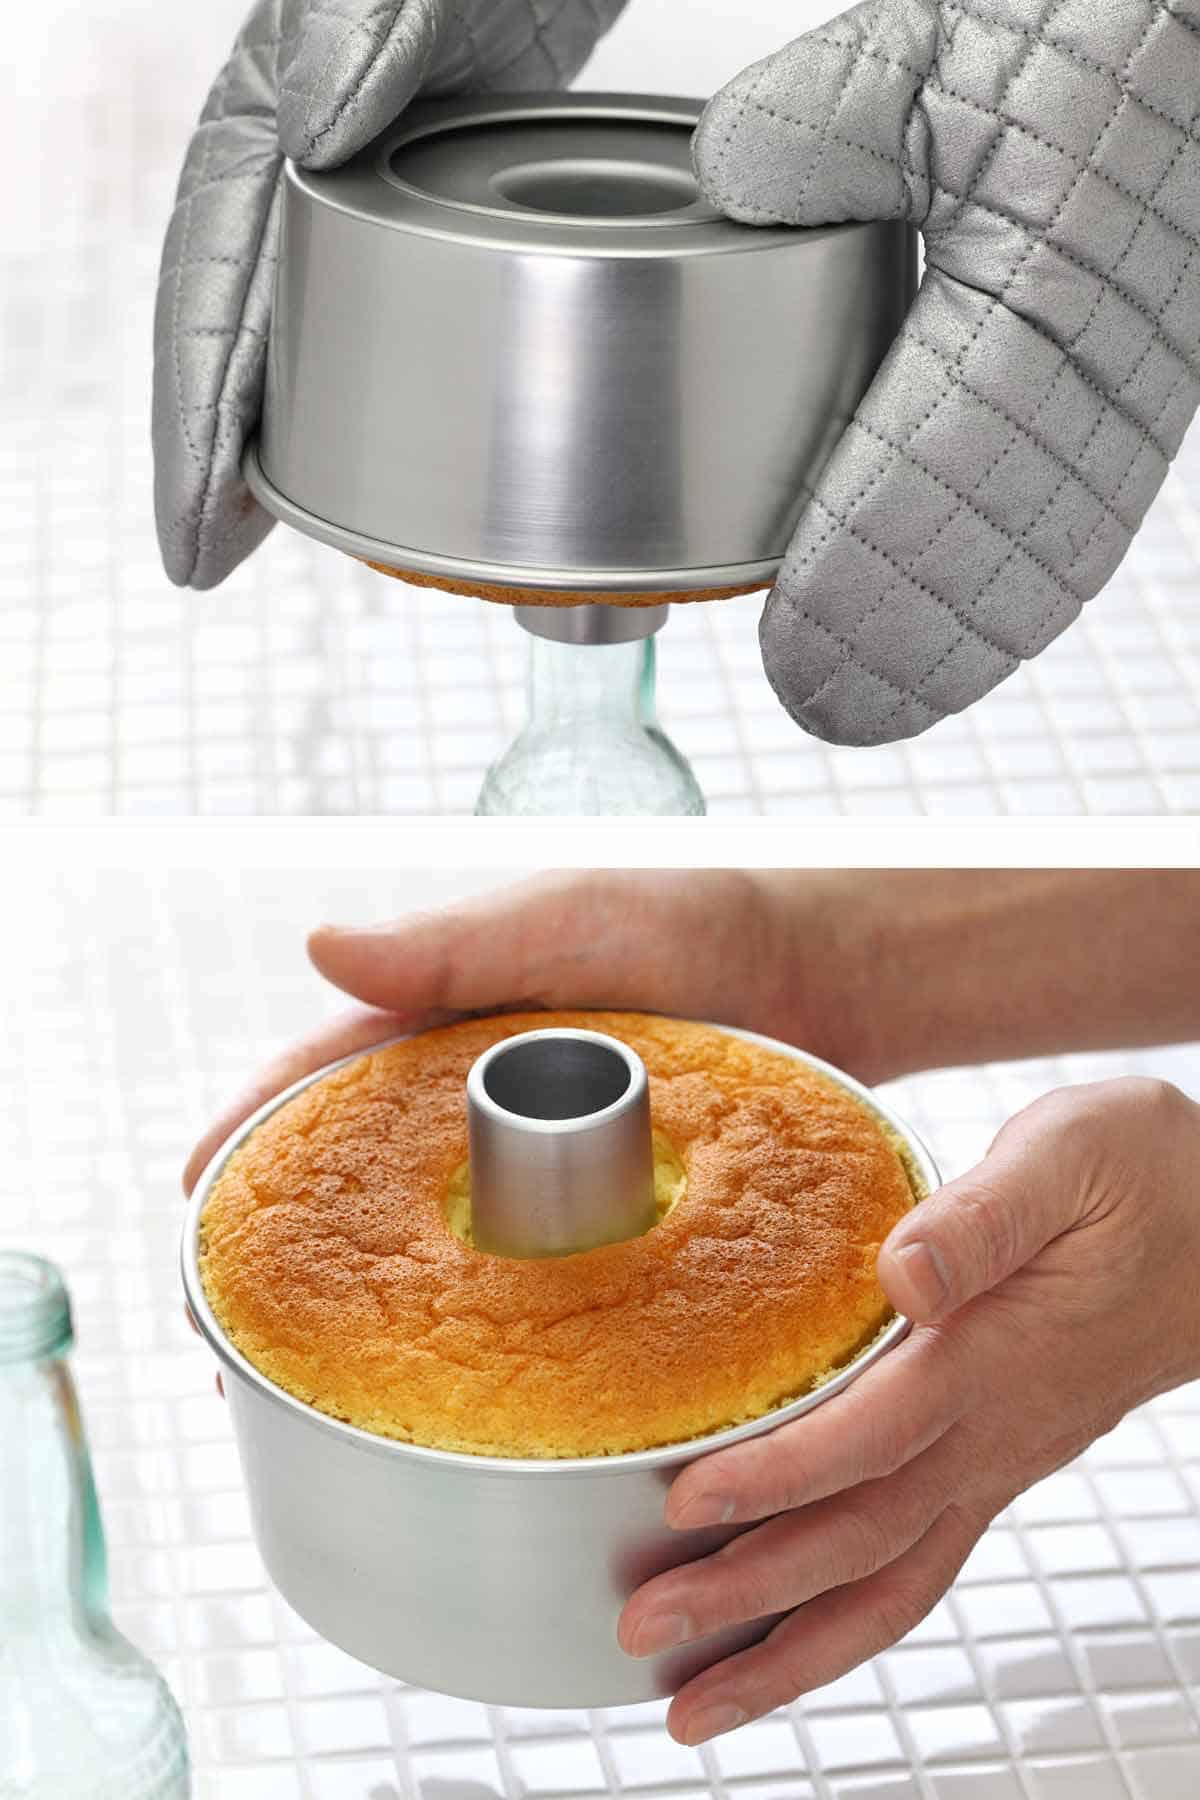 Cooling chiffon cake upside down on top of a glass bottle and then removing it when it is cool.